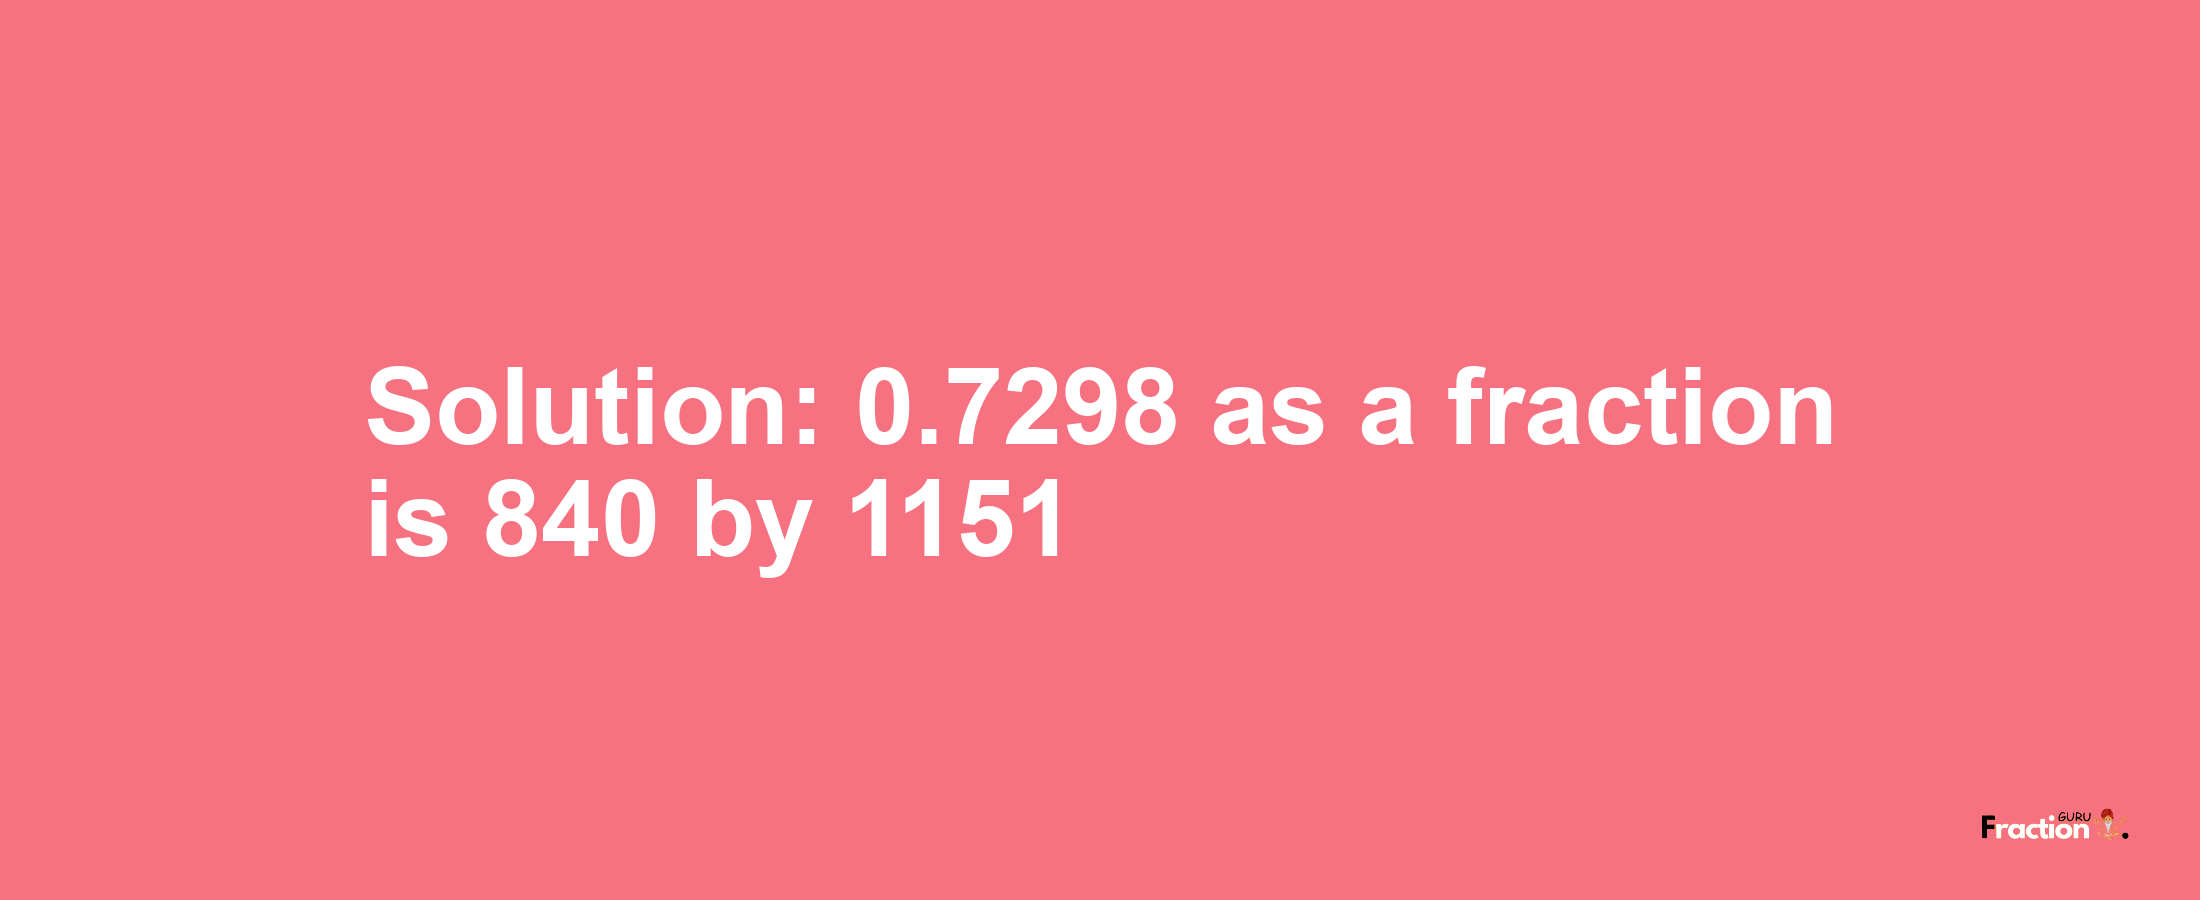 Solution:0.7298 as a fraction is 840/1151